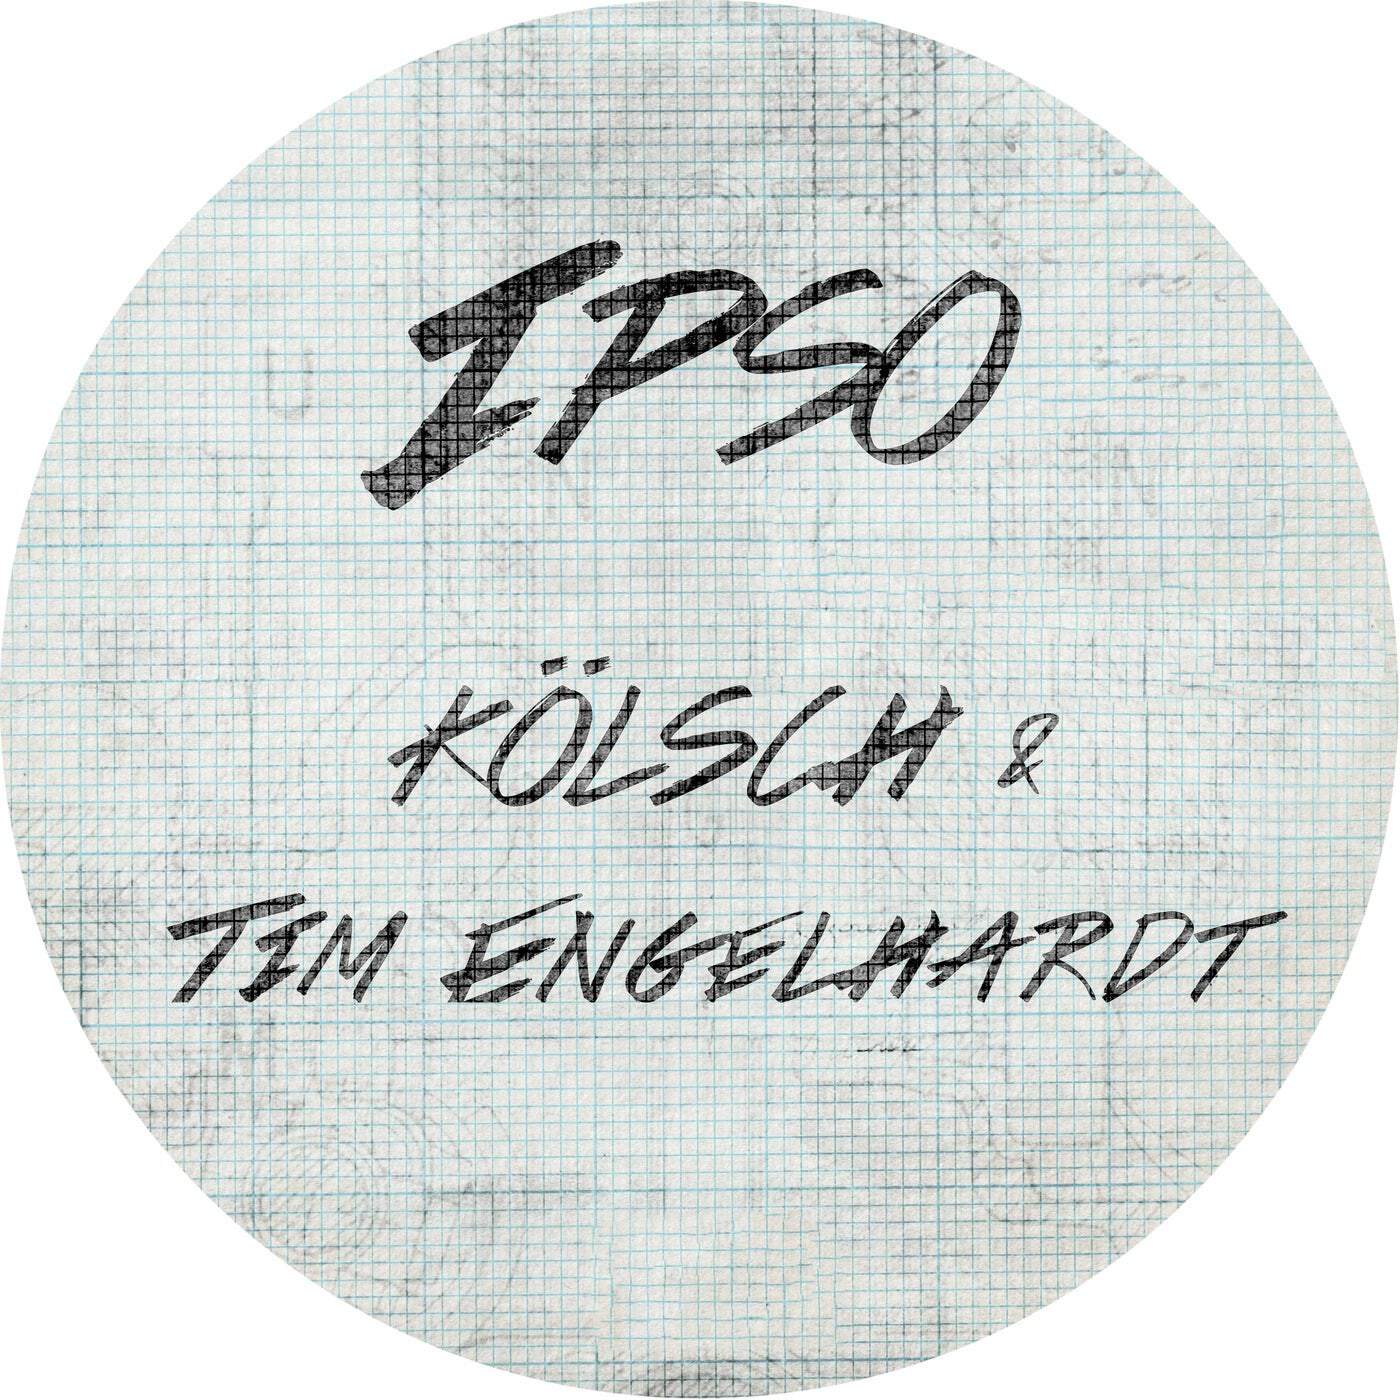 Download Kolsch, Tim Engelhardt - Looking Class / Full Circle Moment on Electrobuzz